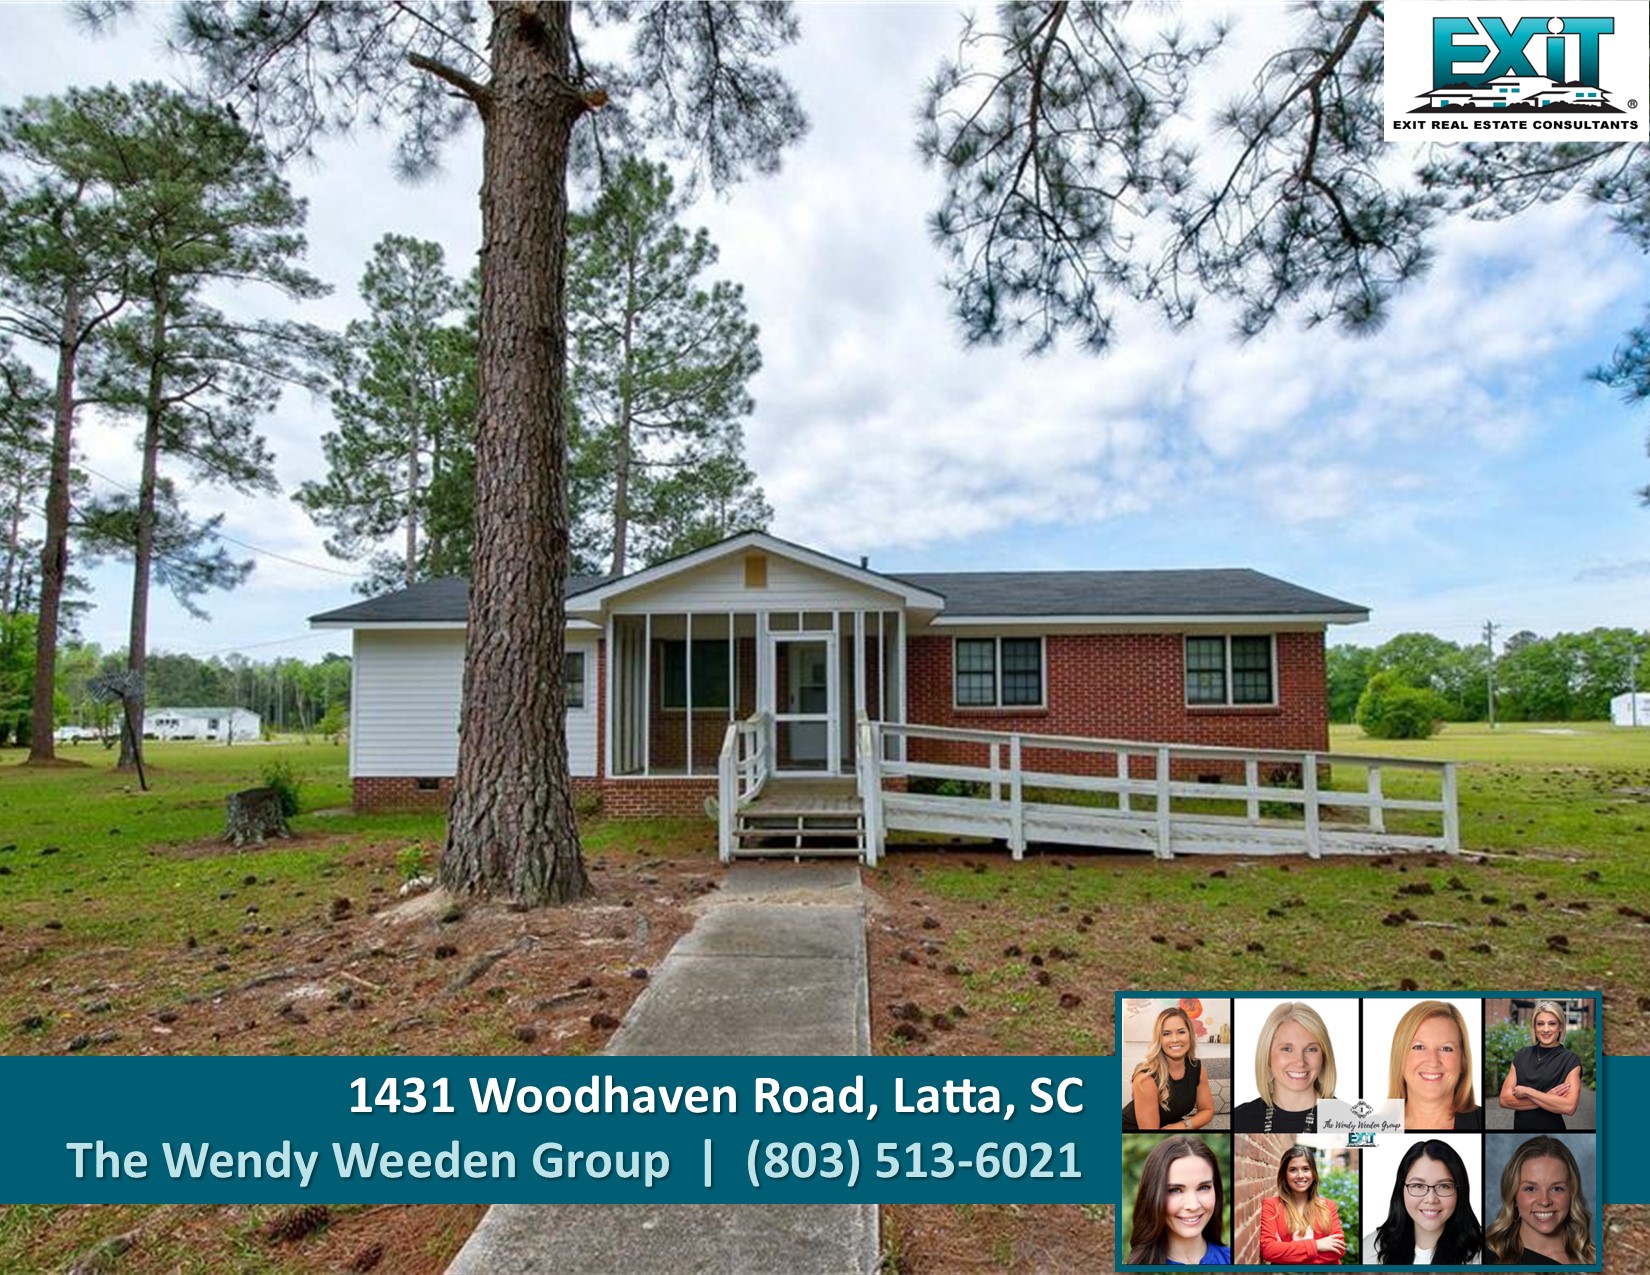 Just listed in Latta